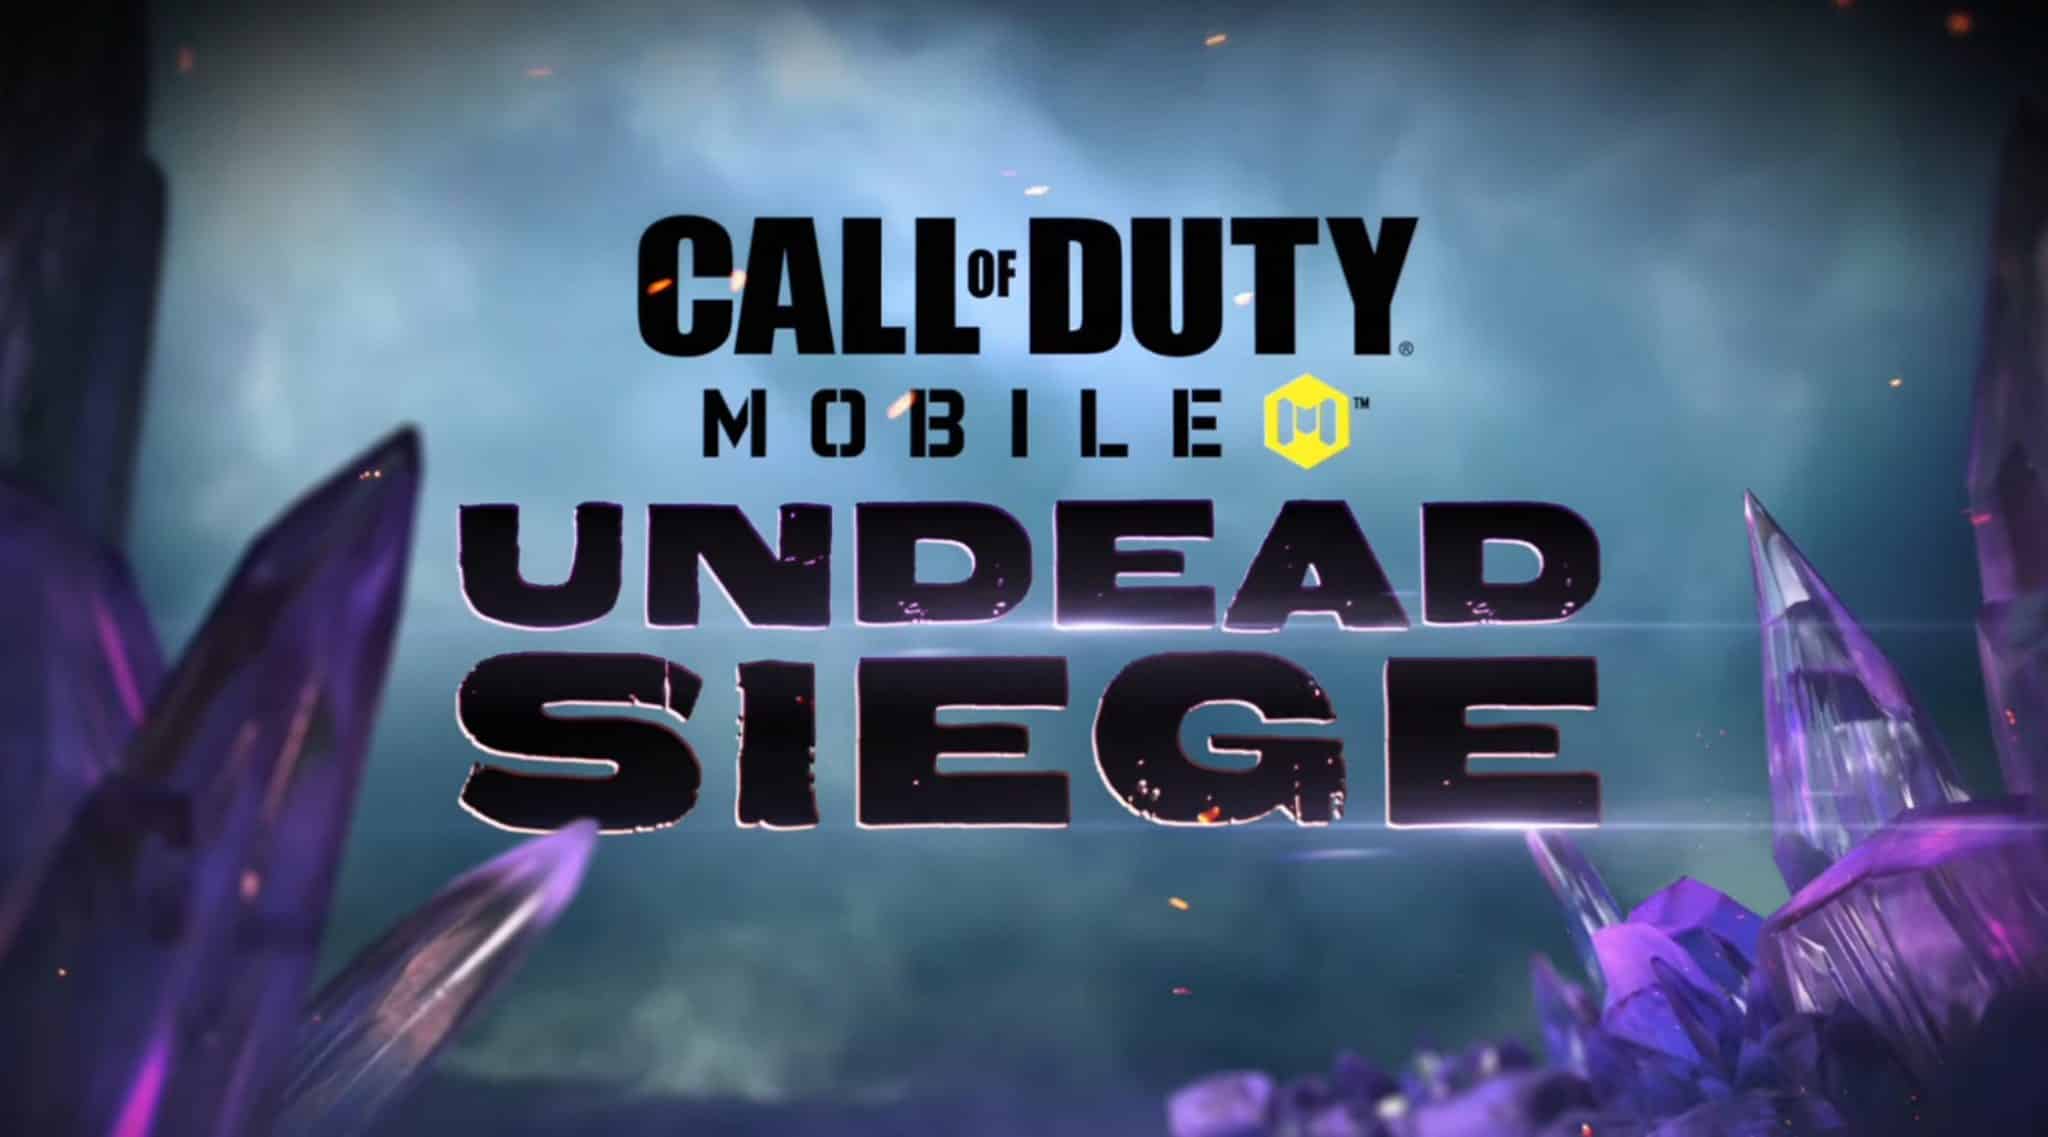 How to play Undead Siege zombies mode in Call of Duty Mobile